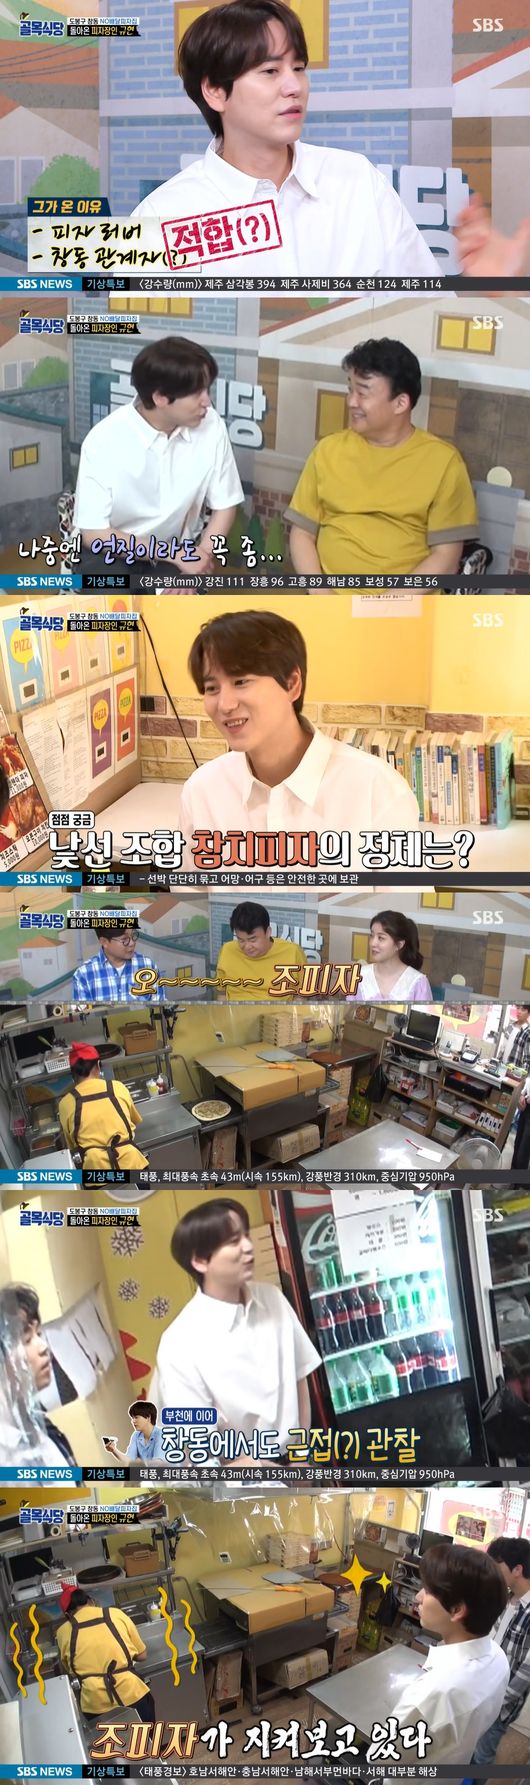 From The Alley Restaurant to Lee Seung-gi to Cho Kyuhyun, he made a surprise visit to the Chang-dong alley in Dobong District and served as an assistant.Dobong District Chang-dong alley was drawn at the SBS entertainment Baek Jong-wons The alley restaurant broadcasted on the 26th.On this day, Baek Jong-won visited the chicken gangjeong house while Dobong District Chang-dong alley was drawn.As soon as Baek Jong-won entered, he checked the garlic in question and said, Do not use chopped garlic, because it smells like sour garlic pickles.Baek Jong-won said, Both of you are too much ahead of the horse, it is good to be good at fighting and good at the guests, but the basics of the food store are taste.Baek Jong-won said, I see you missed the essence, its time to clean up the basics yet, is it embarrassing?I was trying to help the bosses who are trying hard, but I was disappointed when I went over the basics, he said.I did not even look through the garlic bag, it is a play and acting if I do not keep the basics, said Baek Jong-won, who emphasized that there is no meaning if I do not try to do it even if I have a chance of life.The bosses were more eager to make sure that the basics were solid. The bosses bowed their heads, saying, Im sorry.Theres little change in a few weeks, Baek Jong-won said, adding to re-tune the ratio: The most ideal proportion of sugar and starch syrup is important.In addition to garlic, the chickens were the chiefs of the Kangjeong house, which had many things to supplement.Baek Jong-won told the chicken gangjeong house, If you prepare, I will send a difficult brother from this neighborhood.Lee Seung-gi appeared in surprise, and Baek Jong-won asked for feedback while raising the flag of the two presidents who died.I asked for some advice and affectionate advice, and I arrived at the chicken gangjeong house and asked me carefully from the target audience.Lee Seung-gi, who was praised for I came to see the size and fry coating, relaxed the bosses; it made everyone admire with a genuine Maseong talk skill.Lee Seung-gi quickly turned the topic to the dead boss and continued the friendly atmosphere with the story of the neighborhood.Lee Seung-gis friendly consideration, the president, melted his heart, I boasted that our school had Lee Seung-gi, he naturally focused on cooking.Lee Seung-gi, the president who was relaxed because of Lee Seung-gi, decided to taste three different chicken gangsters with blind tests.Lee Seung-gi, who tasted carefully one by one, chose a sugar ratio higher than starch syrup, and the president, who was opposed, also listened.MCs who saw this said, I look at the typical student chairman style and a few opinions, he said, a steam leader who gently induces opinions to the right answer after collecting opinions.Lee Seung-gi said, I am honored to be able to develop together, once I accept the opinion of Mr. Baek Jong-won, make my own idea. He expressed his encouragement with a warm heart and heart like his senior and local brother.He delivered a 100,000 won cheering car and said, Buy more materials and practice more. He left a commemorative photo with Chang-dong Brothers.Next, the NO delivery Pizza house was pictured.The Italian chef, who was SOS by Baek Jong-won, said, Pizza is a popular food, and said he would deliver the price to Chang-dong commercial area.Baek Jong-won added a large-capacity recipe by gradually increasing the amount from menu to sauce, cheering for the boss to find his own taste. He said he would keep the sauce taste but increase the amount.Decided to check the large-capacity Pizza sauce, Baek Jong-won again found the NO delivery Pizza house.The president immediately introduced the Pizza he studied and completely changed his style in a week after the solution, making Baek Jong-won desperate.Baek Jong-won showed the principle and difference of toppings directly, saying, We need to know the principle of Pizza.In the situation room, Cho Kyuhyun came back as a Pizza craftsman, and his hometown was nearby.Cho Kyuhyun visited the NO delivery Pizza house, saying, I did not live but it was an alley with memories during my school days.We decided to try the new menus, Pizza and Pizza.In half-expected, Cho Kyuhyun approached the kitchen and studied how to make Pizza. The boss was nervous.Finally, Pizza was completed and first tasted from Pizza. Cho Kyuhyun said that toppings were new and I do not think it is an impressionable taste.Then I heard the price and said, Pizza is good for caustic rain.Salami Pizza also tasted, and Cho Kyuhyun carefully tasted it again, saying, The red pepper oil is not spicy but the taste is not clear.Cho Kyuhyun added, I usually use red pepper oil, but I do not feel more special because red pepper oil is in.Baek Jong-won and MCs also looked at it on the monitor, saying, There is a lot of toppings.Baek Jong-won called Cho Kyuhyun and said, I am looking at it accurately. He pointed out that the toppings made the taste rather bland, and asked the president to make it as he learned.The president made Pizza again from the beginning by utilizing memories he learned again.Pizza with proper toppings was sampled again, Cho Kyuhyun said, It is a more savory taste. He said that the taste was changed even if the amount of topping was reduced.Salami Pizza also has less red pepper oil and is not thick.Baek Jong-won also expressed his pride in saying, This is why the third party should come and eat, agreeing that the balance of toppings and the harmony of toppings are important.At the end of the Chang-dong alley solution in Dobong District, Seoul, I visited the Pasta house.In the situation where I studied cooking with meatballs and Arachini Pasta, Baek Jong-won said, Pasta rubber Lee Seung-gi is a praiseworthy taste.Baek Jong-won said, This is why Mr. Seung-gi is perfect, he said. It is a taste that I want to add.Savoie is good, he said, admiring both the taste and the price. It is a taste that I want to order both menus.As a result, the president completed four menus and impressed Baek Jong-won by saying, I want to grow slowly rather than greedy.The alley restaurant captures the broadcast screen